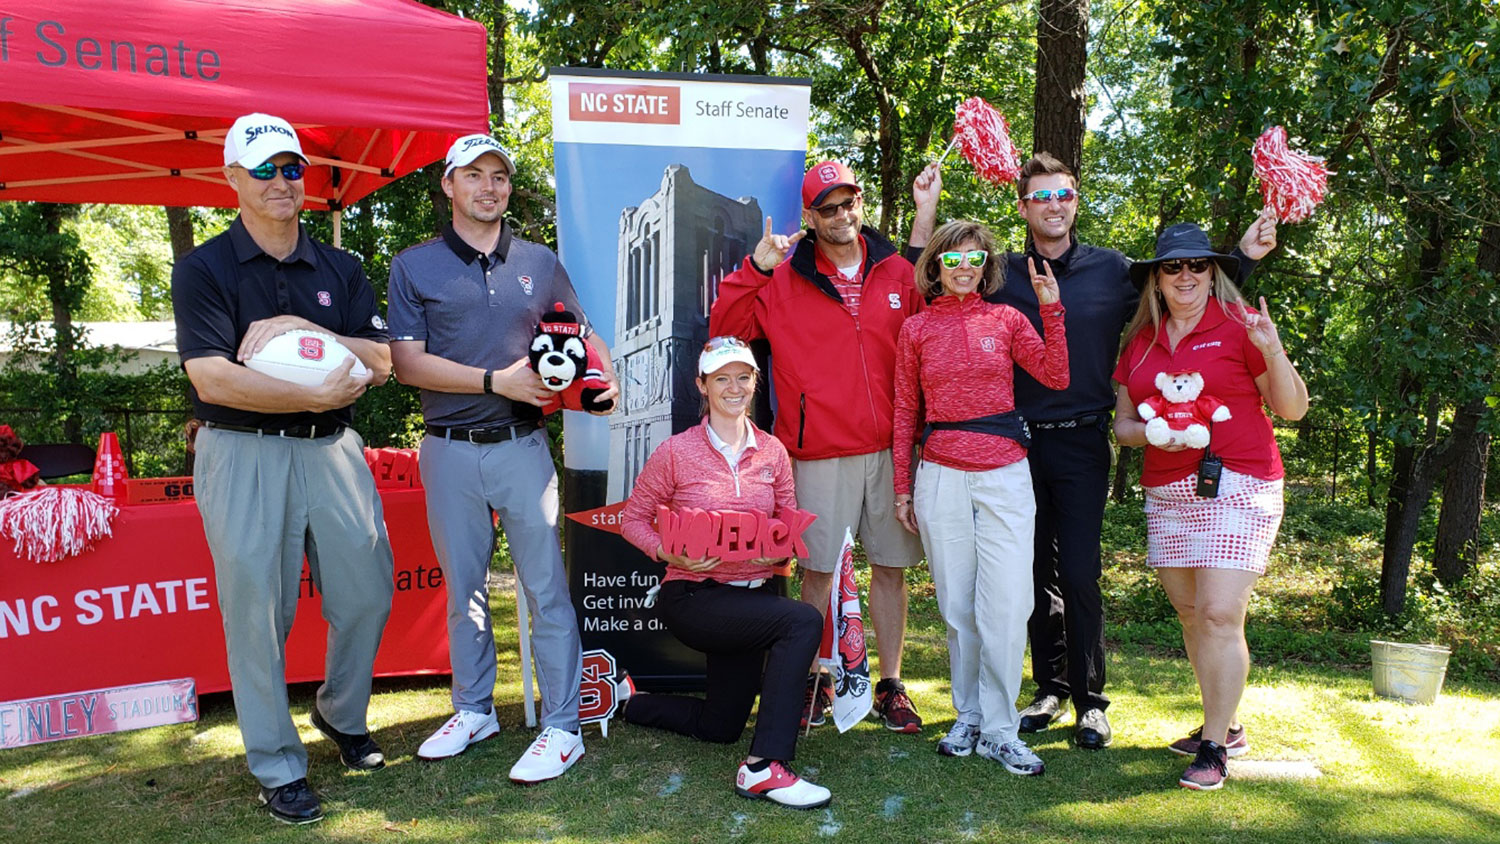 NC State staff pose in front of a red tent at a golf tournament